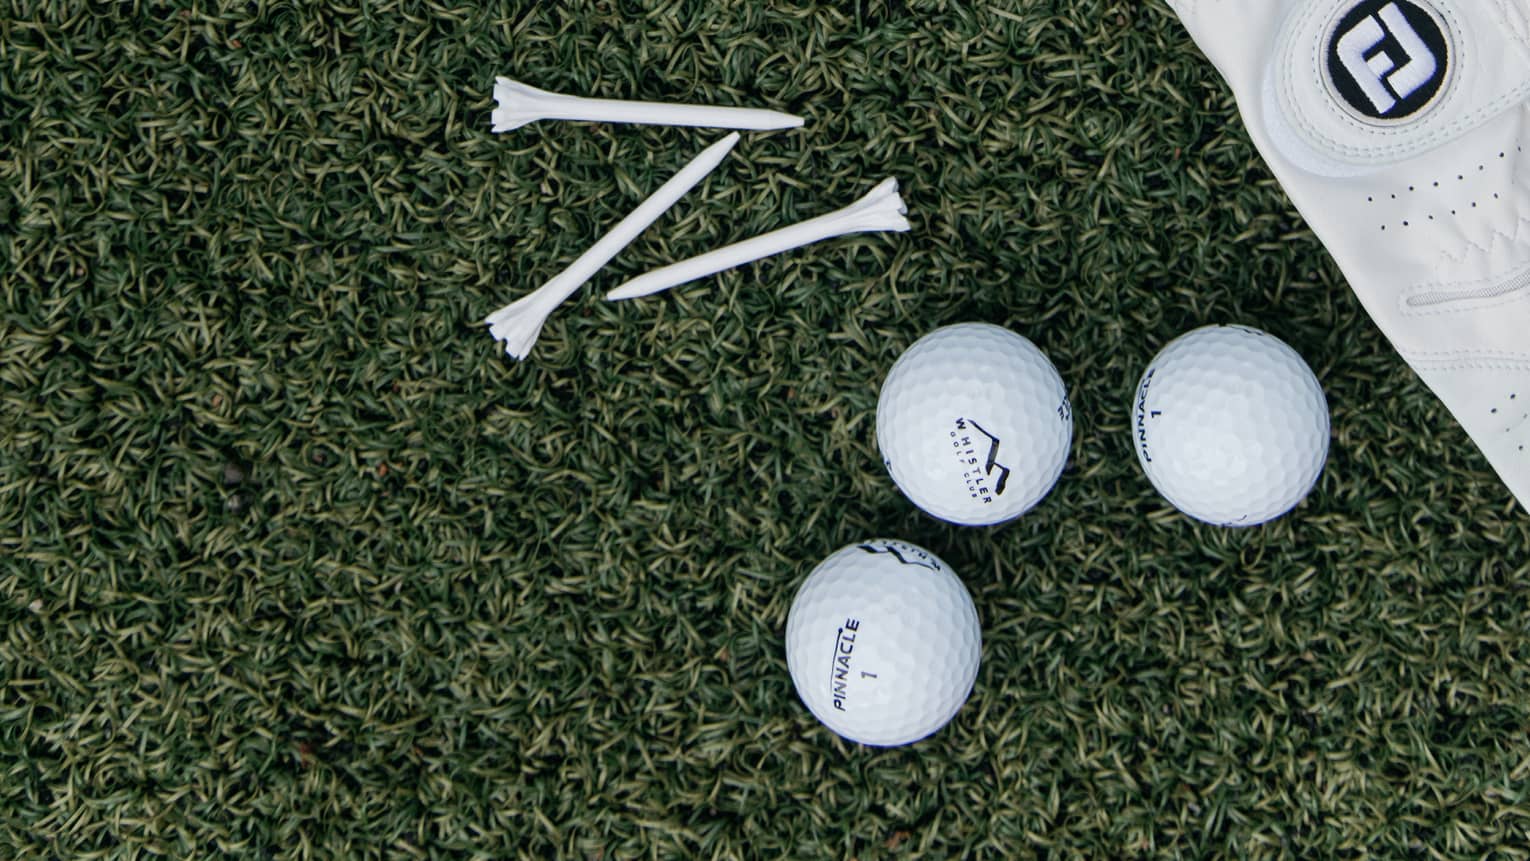 On green turf, a Four Seasons card, three golf balls, three tees and a white leather golf glove dotted with tiny holes.